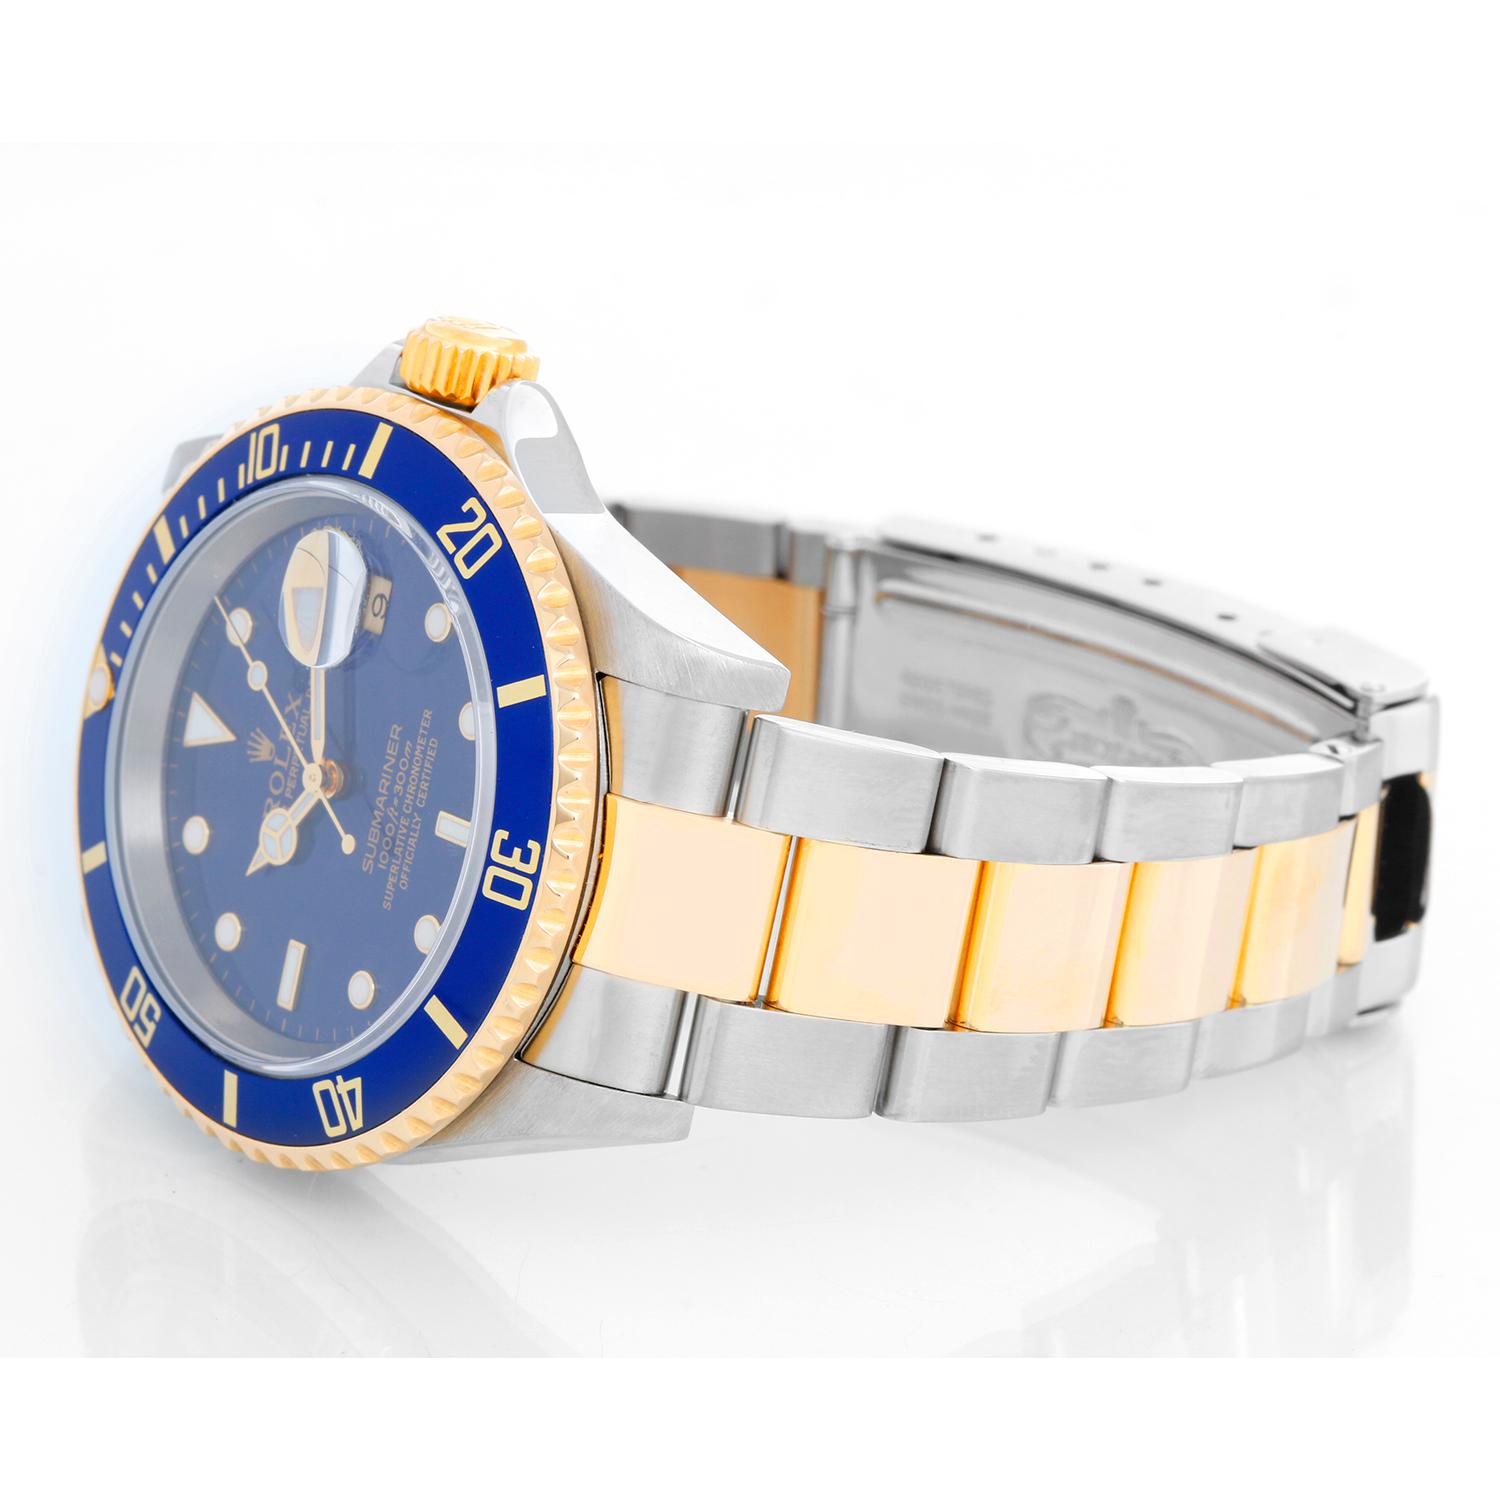 Rolex Submariner 2-Tone Steel & Gold Men's Watch 16613 - Automatic winding, 31 jewels, pressure proof to 1,000 feet. Stainless steel case with 18k yellow gold bezel . Blue dial with luminous markers; date at 3 o'clock. Stainless steel and 18k yellow